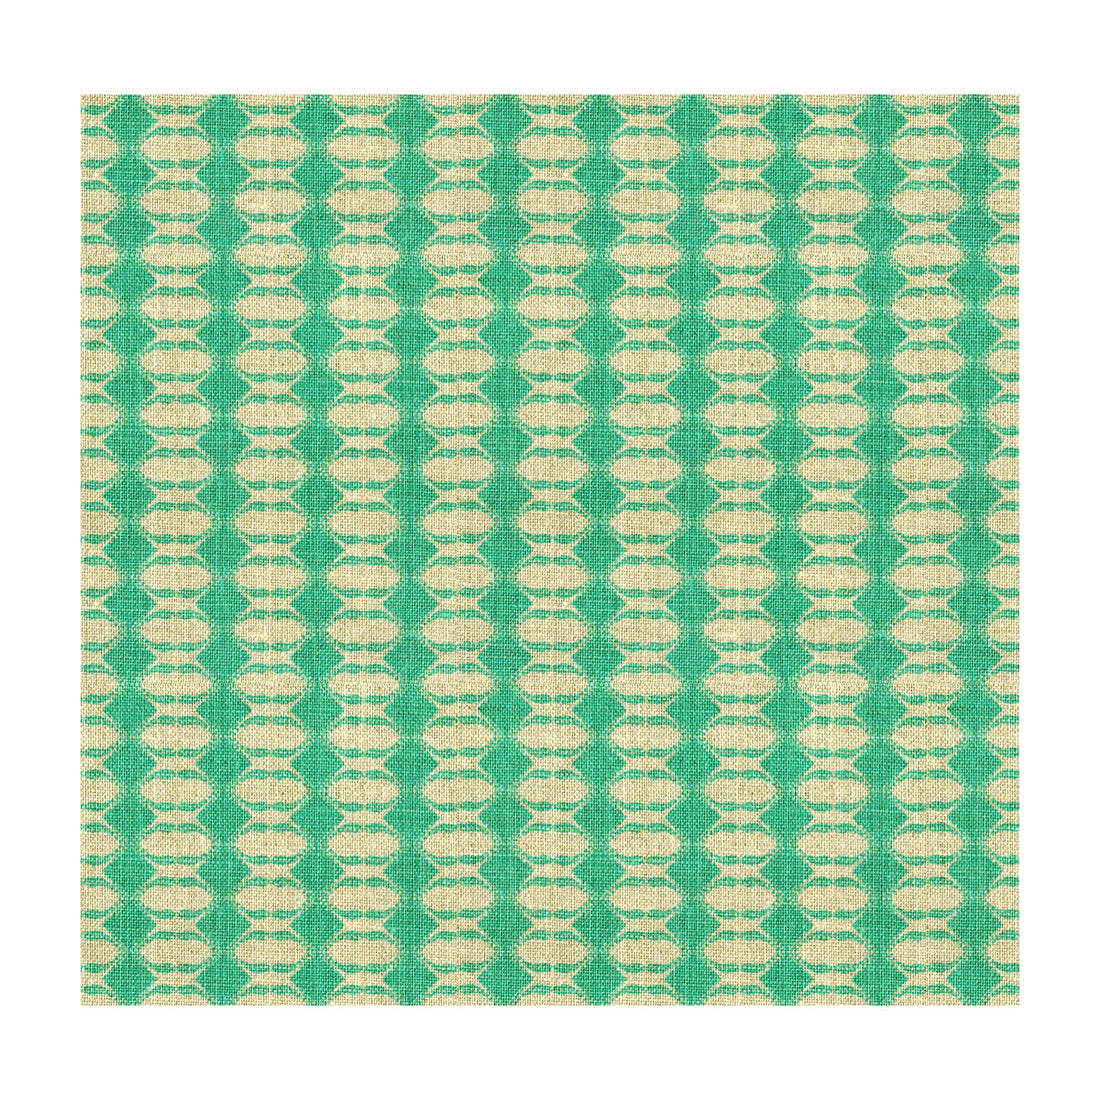 Diamond fabric in aqua color - pattern GWF-3507.13.0 - by Lee Jofa Modern in the Allegra Hicks Garden collection